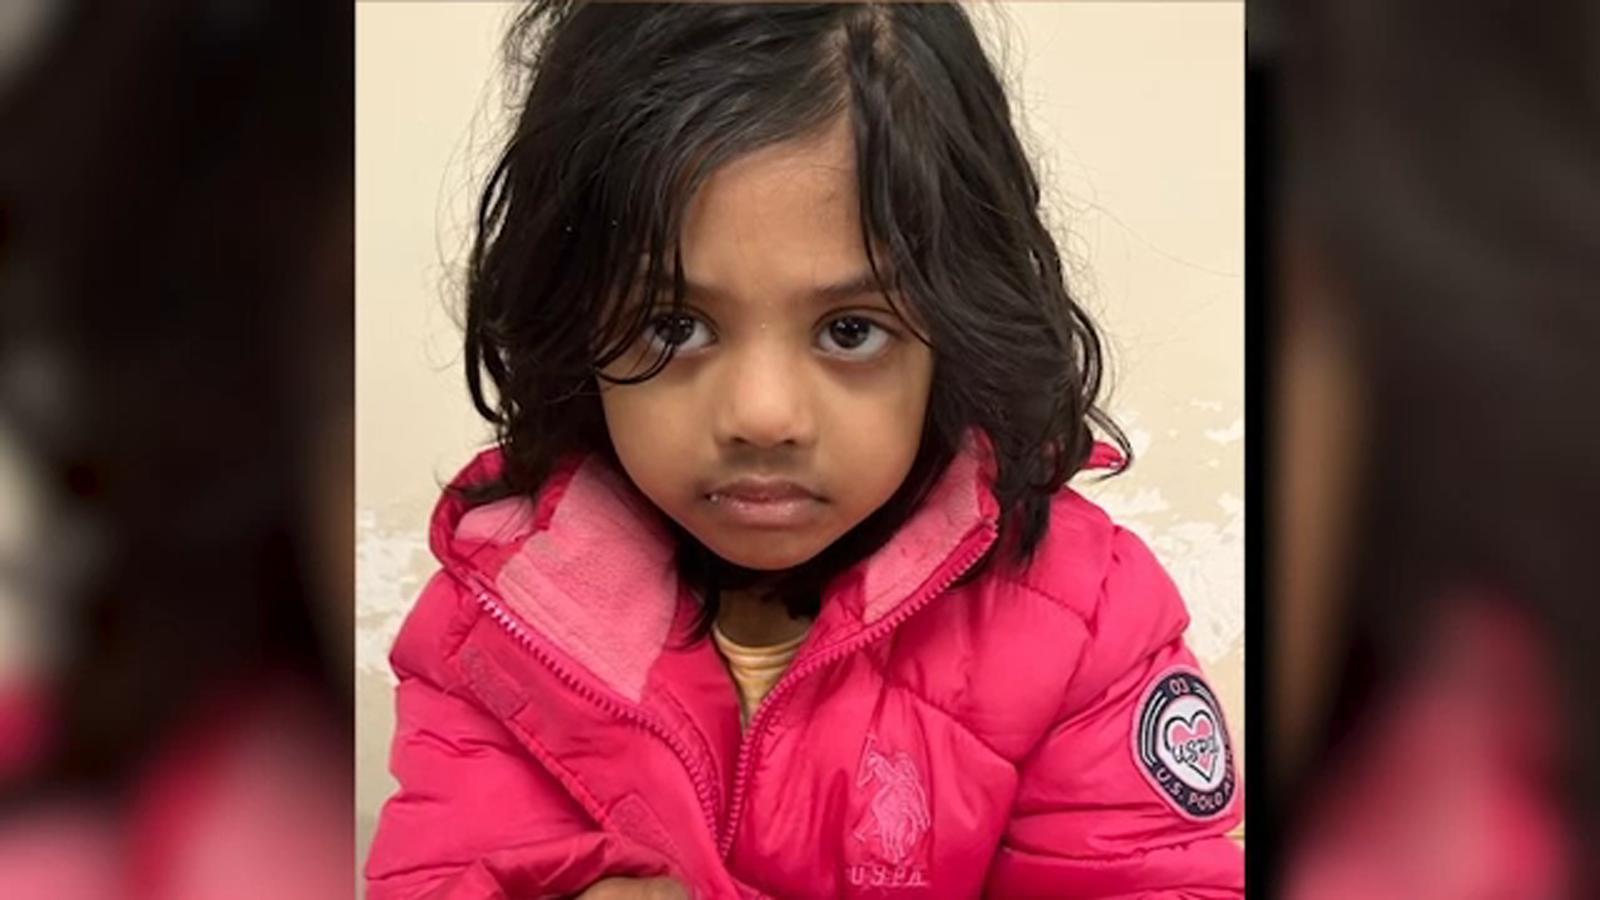 Police searching for guardian of young girl found alone in Bronx on New Year’s Eve